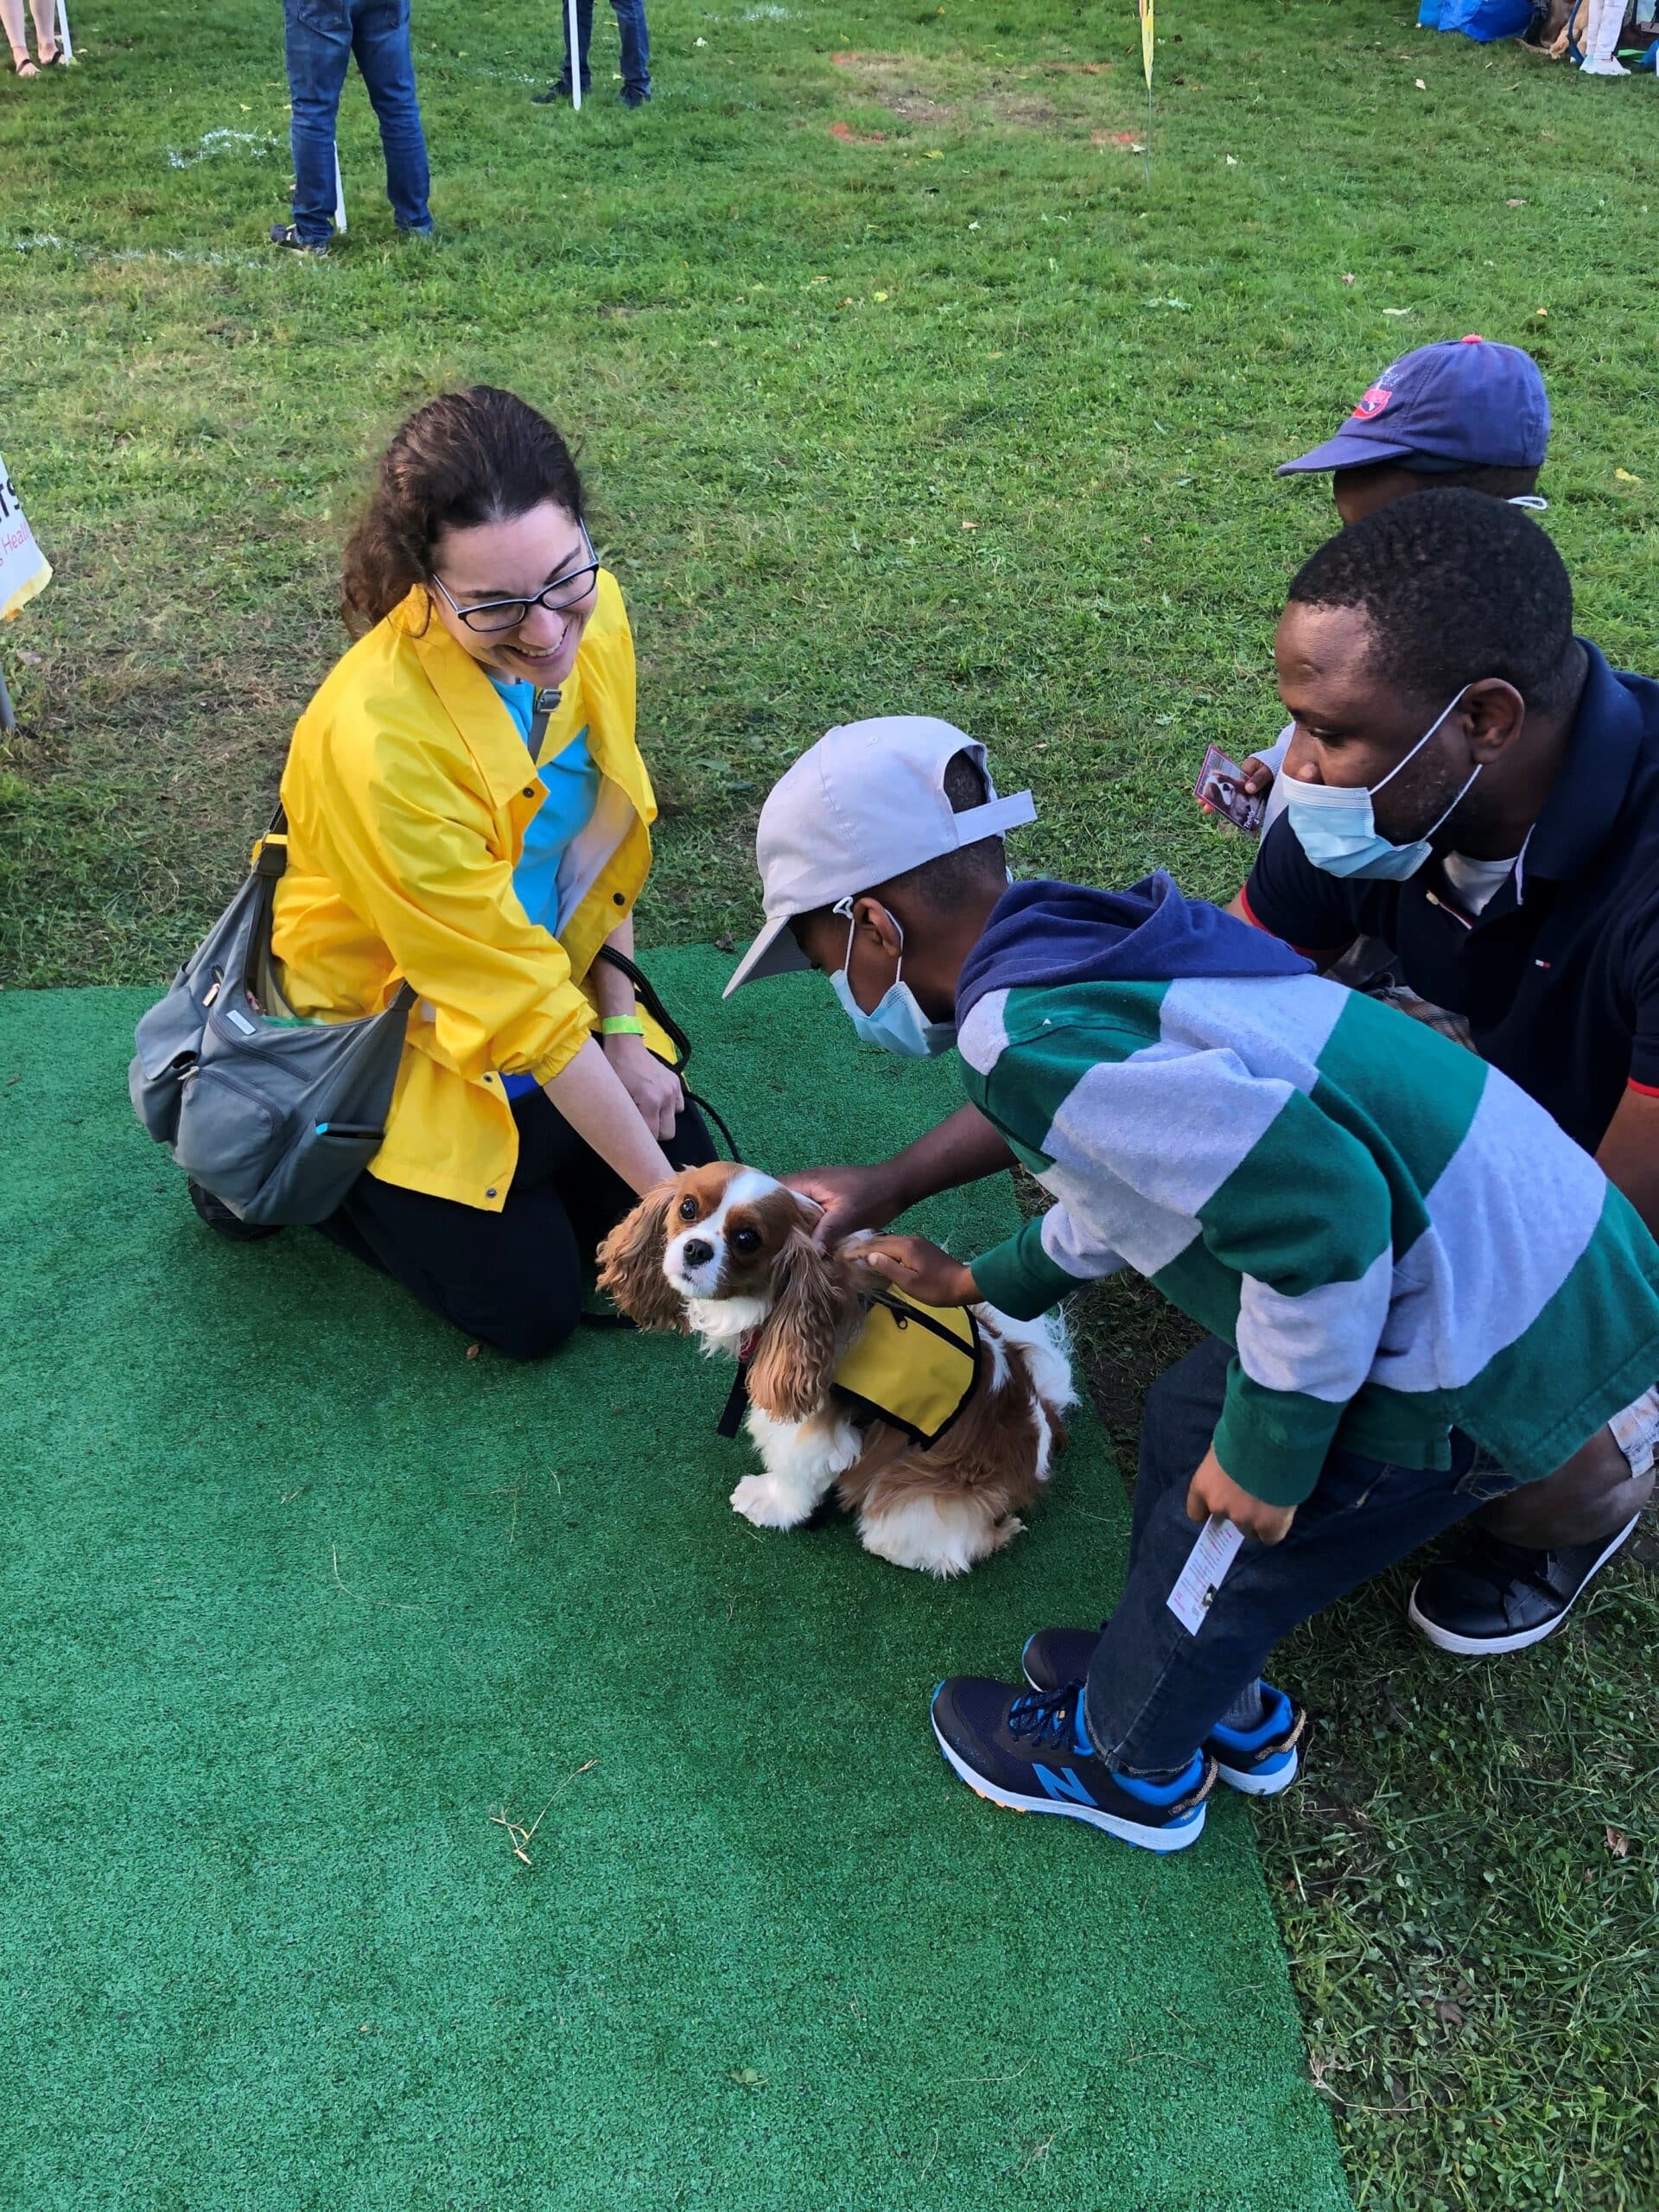 A therapy dog handler encourages two young boys and their father to pet her cavalier King Charles spaniel therapy dog.